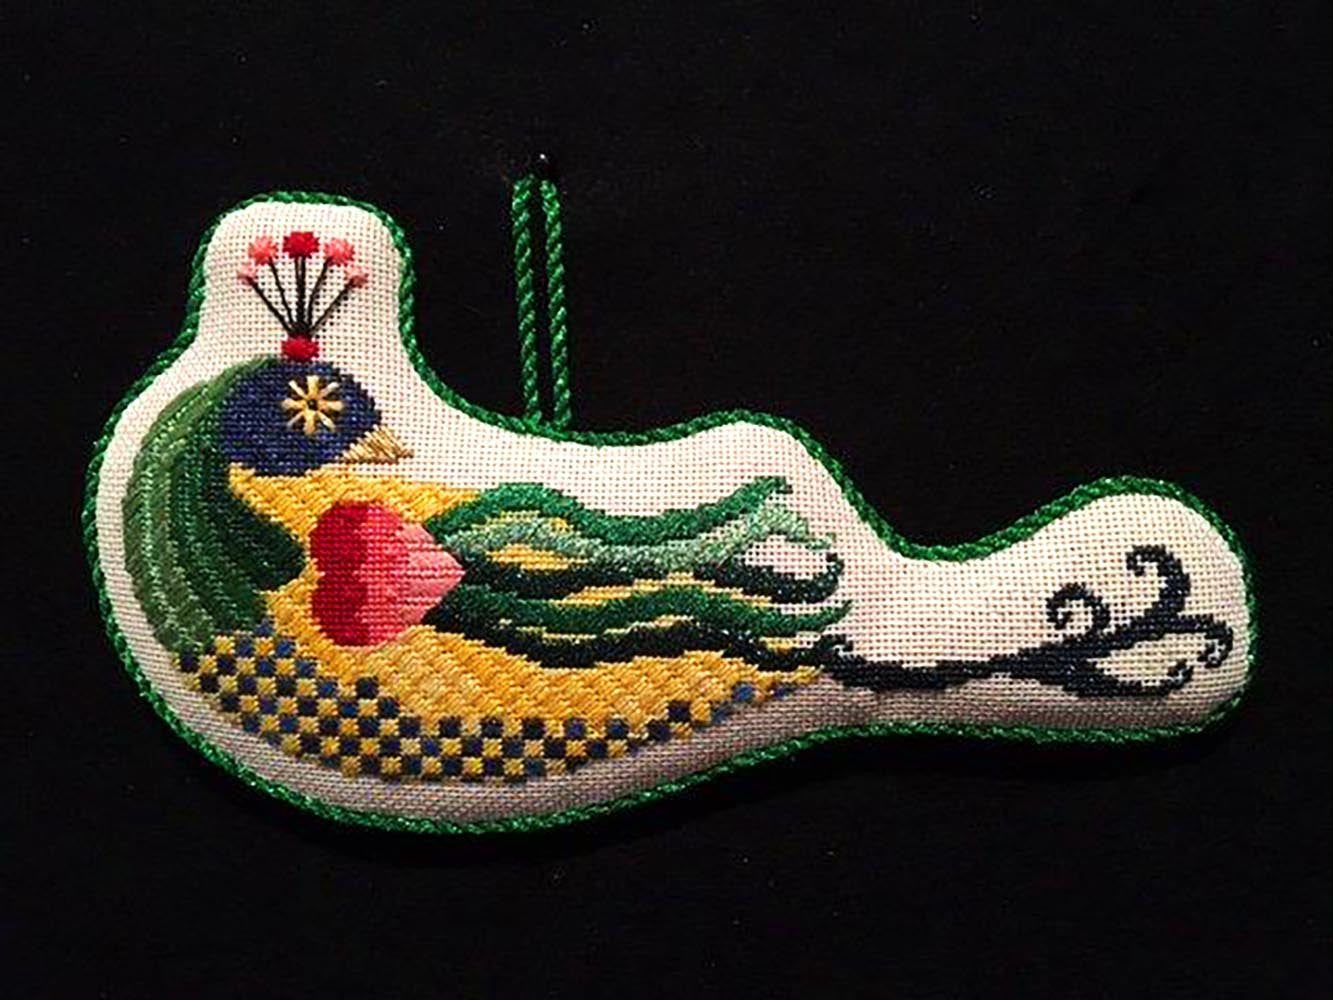 Bird Canvas ~ Lovely Bird with STITCH GUIDE handpainted Needlepoint Canvas by Mile High Princess